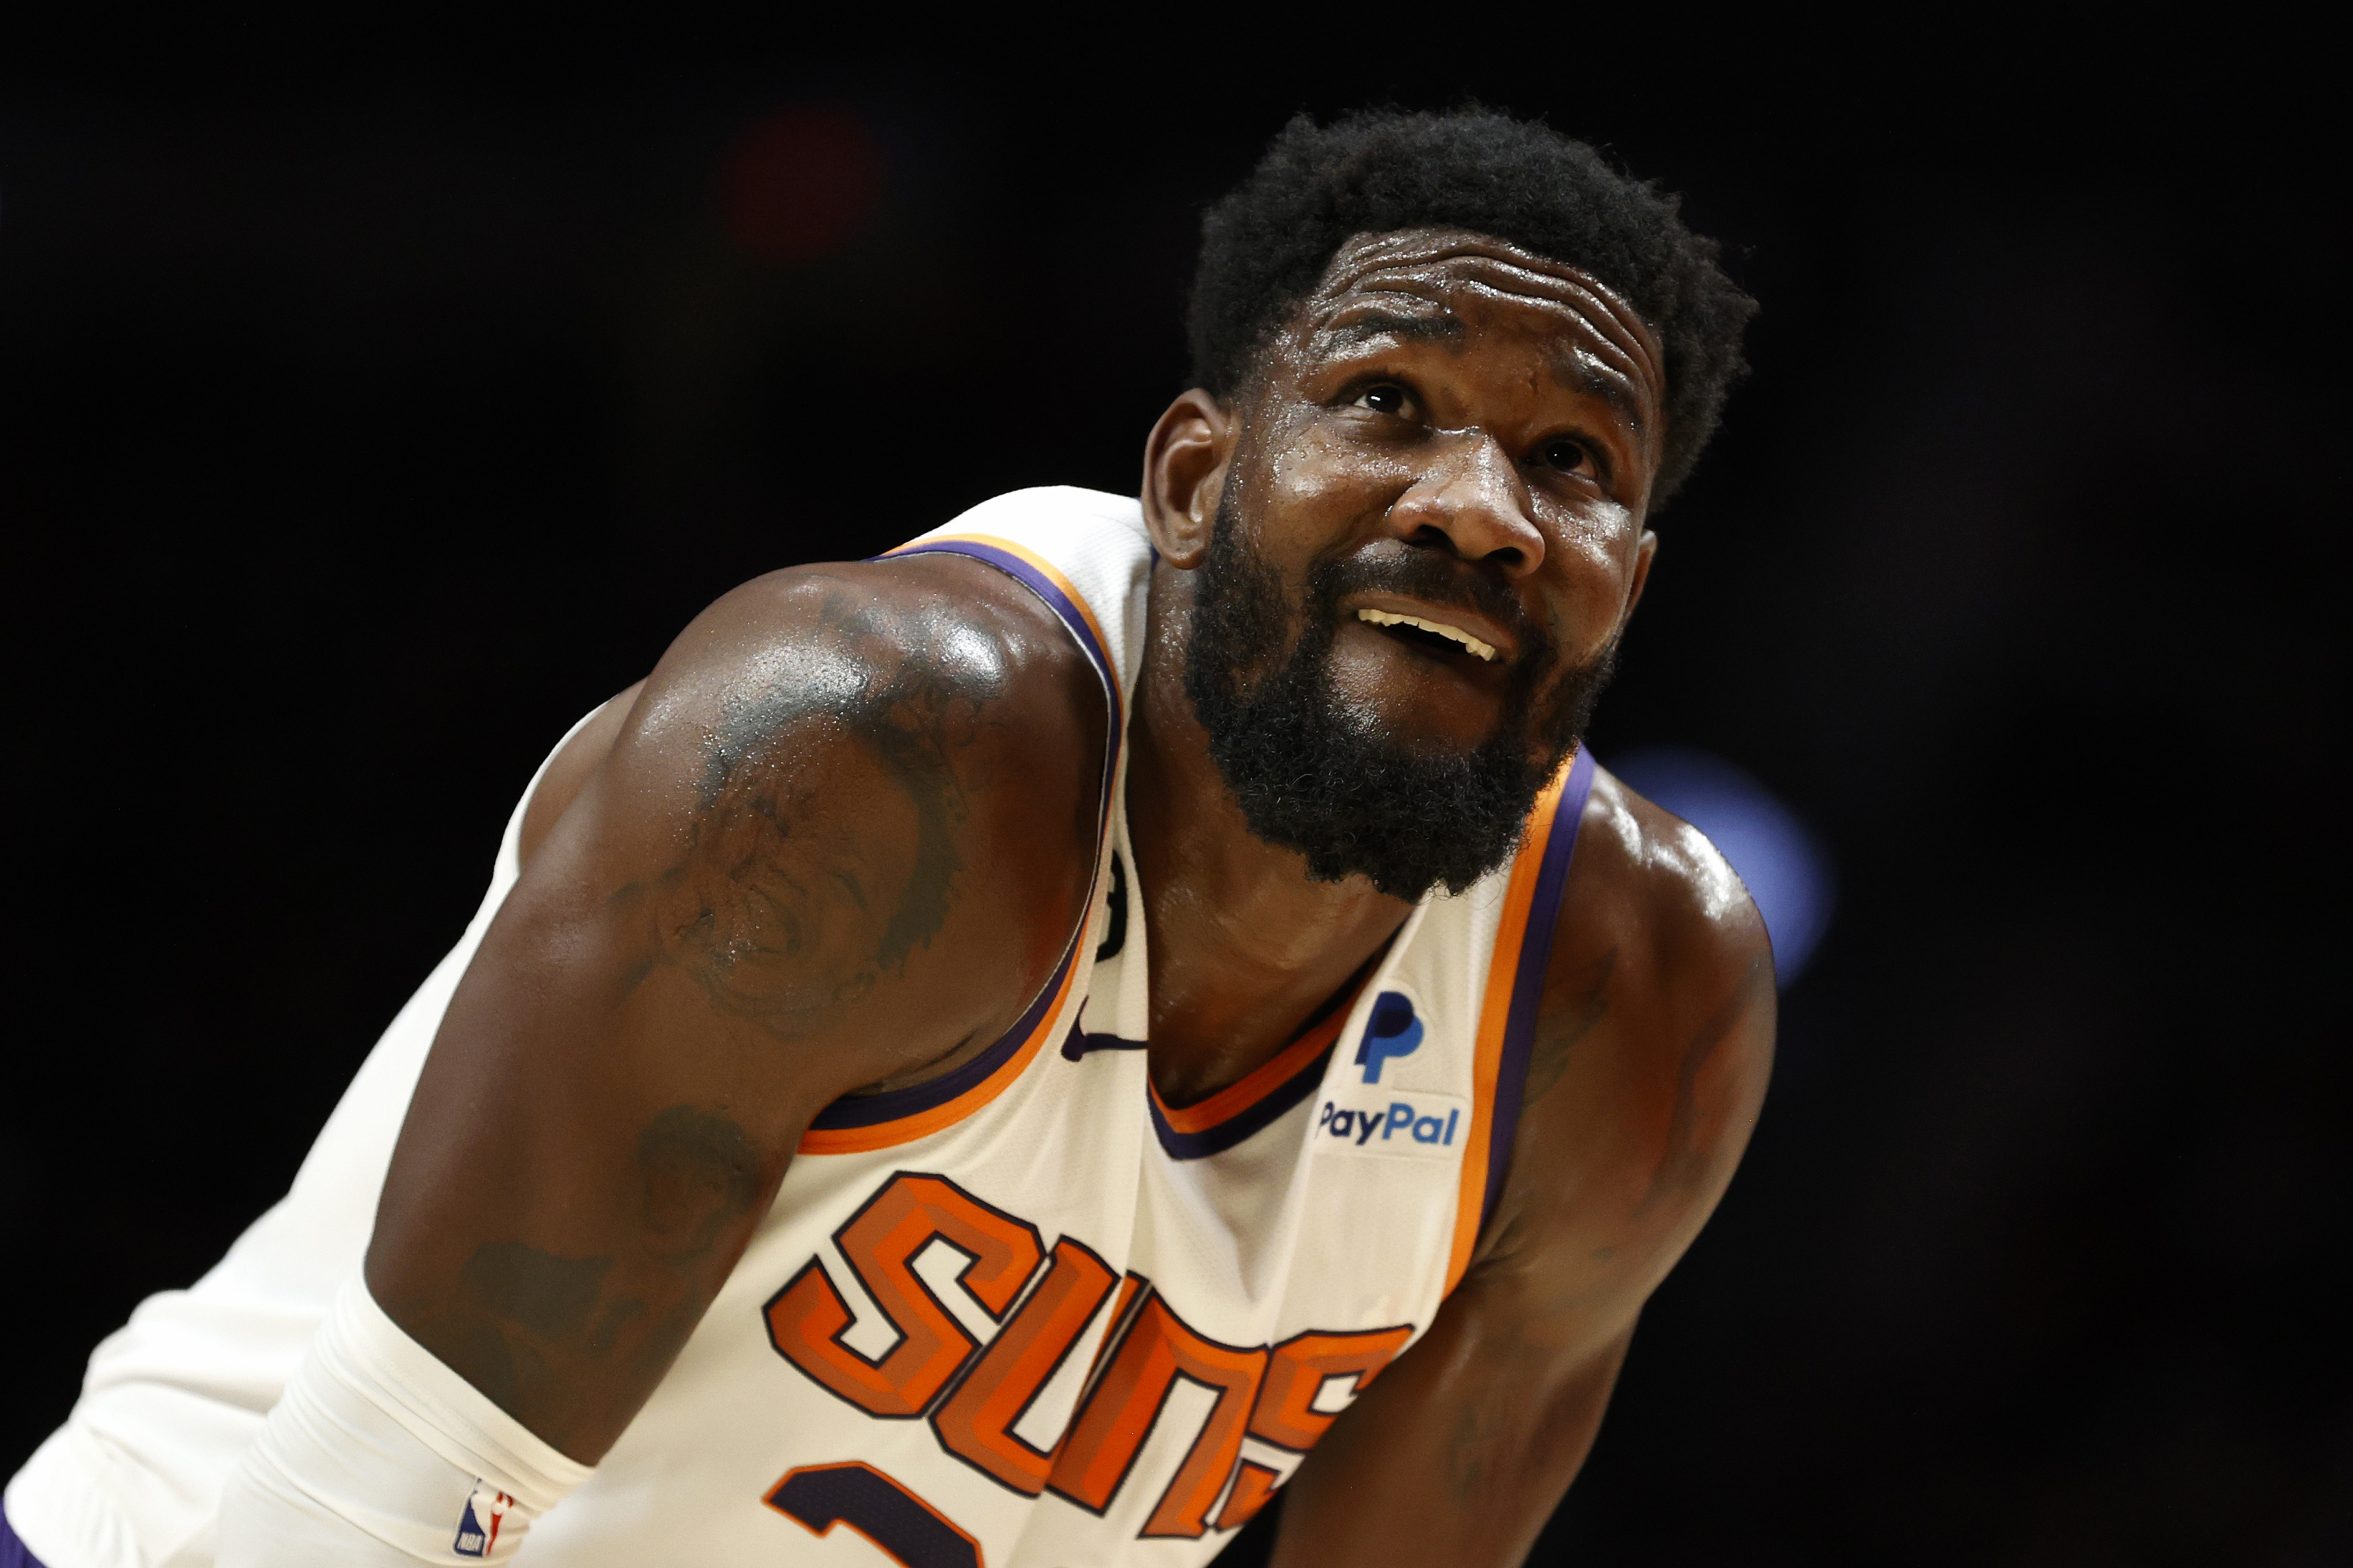 Deandre Ayton's career with the Phoenix Suns in photos